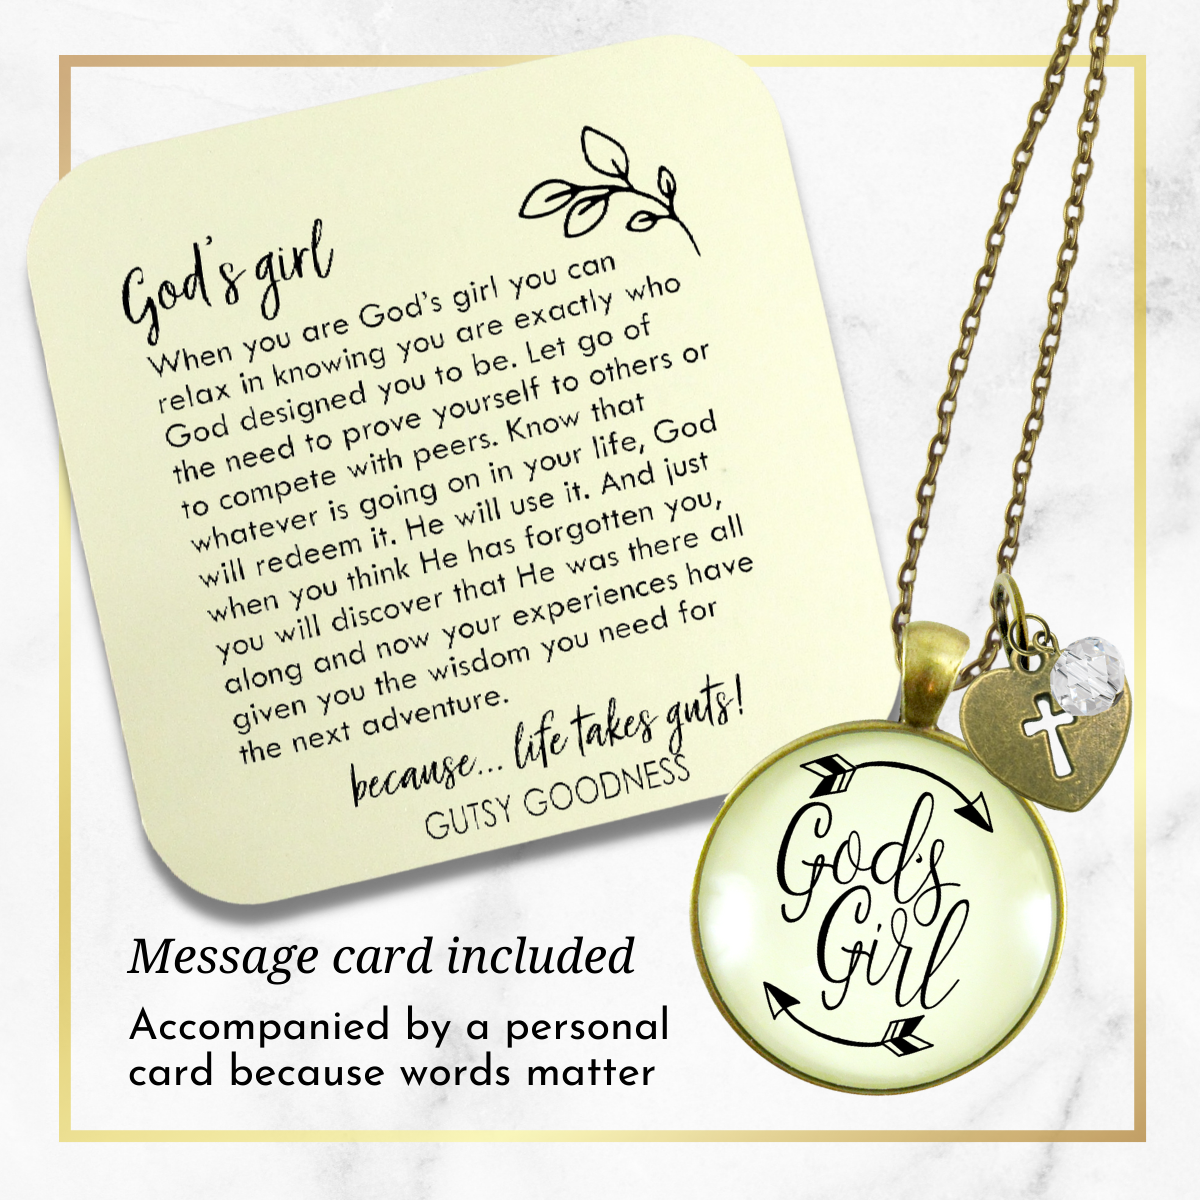 God's Girl Necklace Faith Inspired Hipster Fashion Teen Life Jewelry Heart Charm  Necklace - Gutsy Goodness Handmade Jewelry